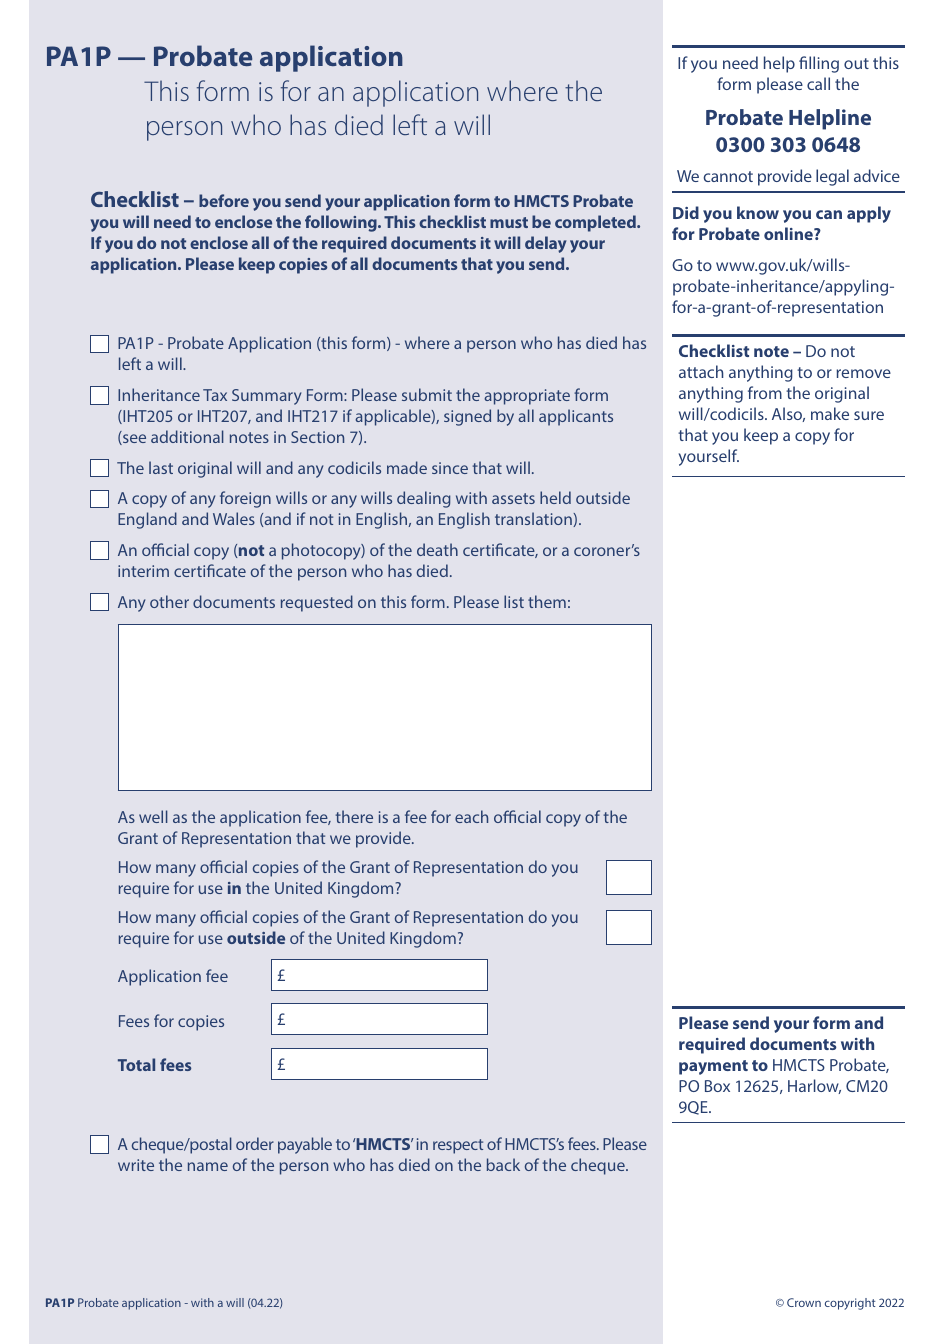 Form PA1P Probate Application - With a Will - Citizen Applicants Only - United Kingdom, Page 1